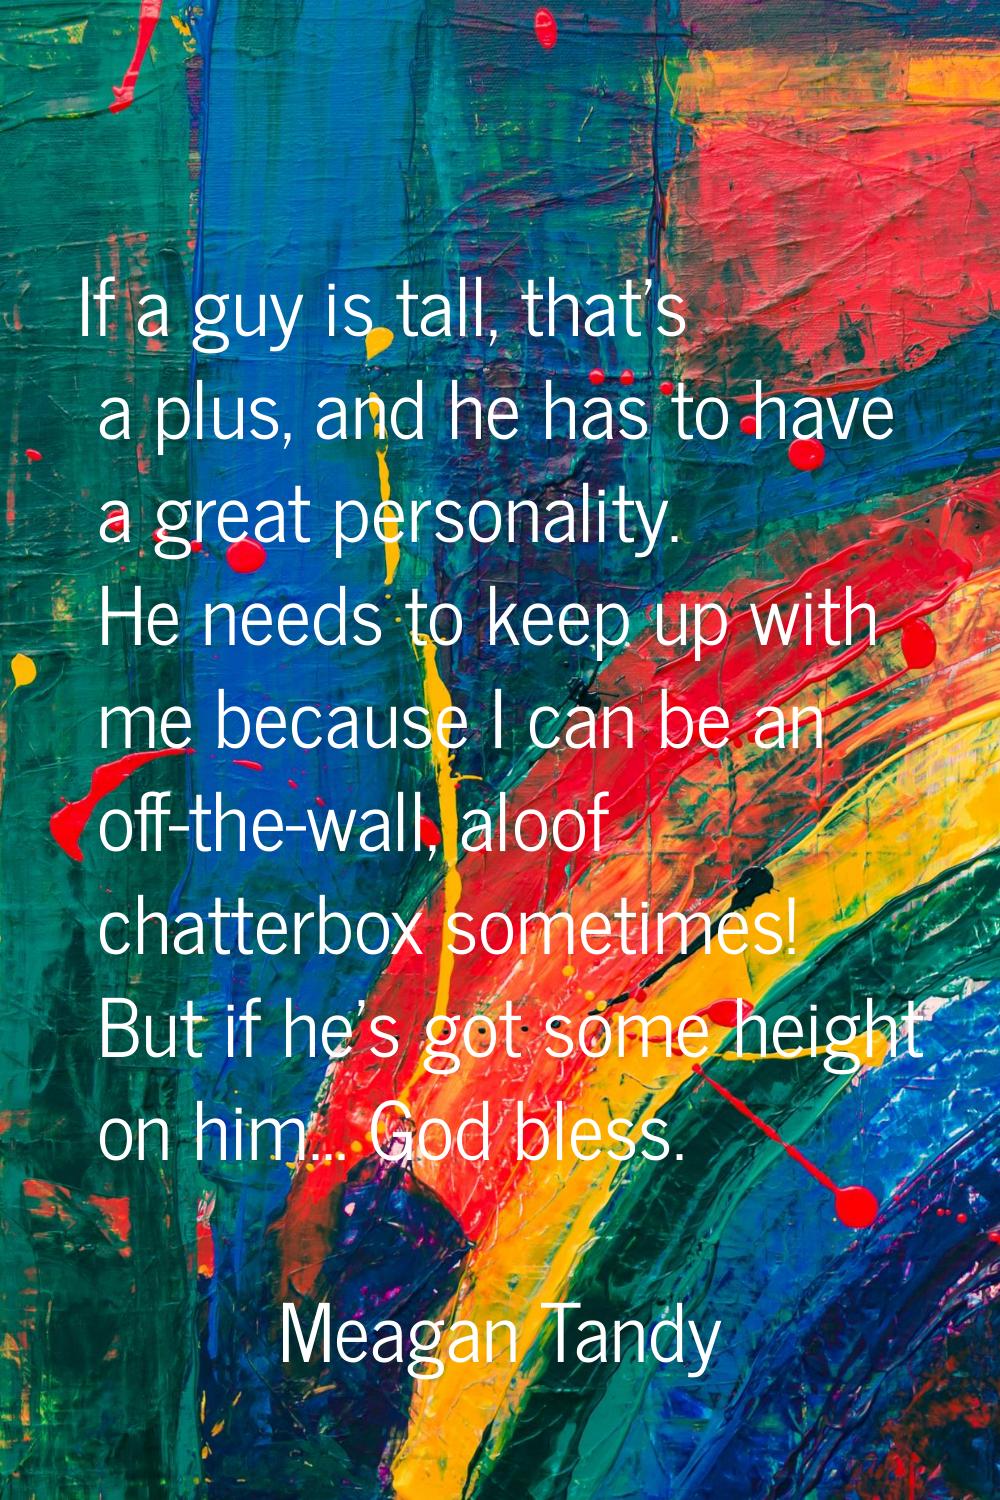 If a guy is tall, that's a plus, and he has to have a great personality. He needs to keep up with m